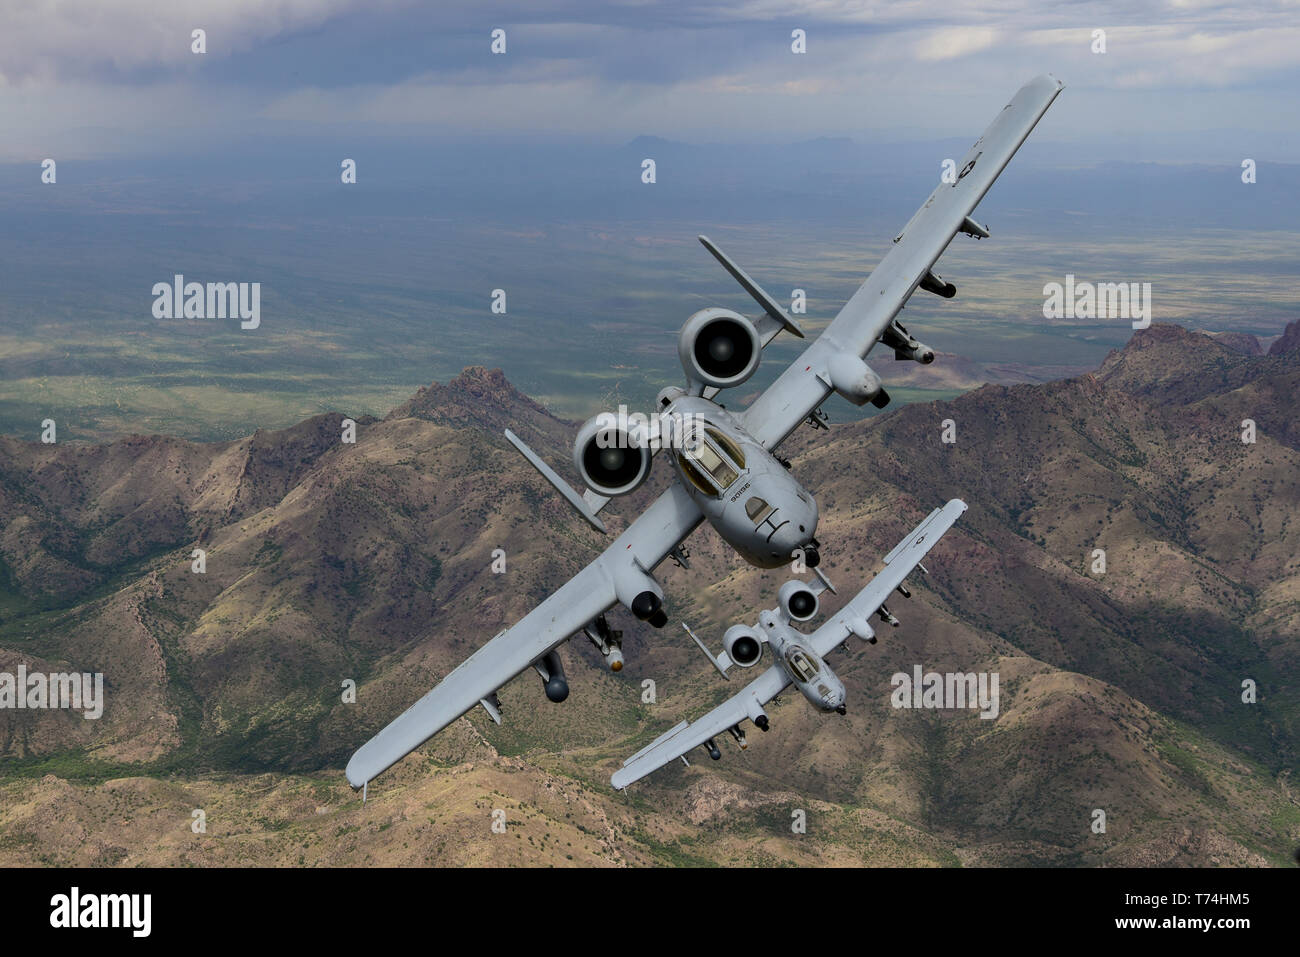 Two A-10C Thunderbolt IIs fly in formation over southern Arizona, April 29, 2019.  The A-10 is built around the GAU-8 Avenger 30MM Gatling gun and is capable of carrying an additional 16,000 pounds of munitions under the wings and belly of the aircraft. (U.S. Air Force photo by Staff Sgt. Betty R. Chevalier) Stock Photo